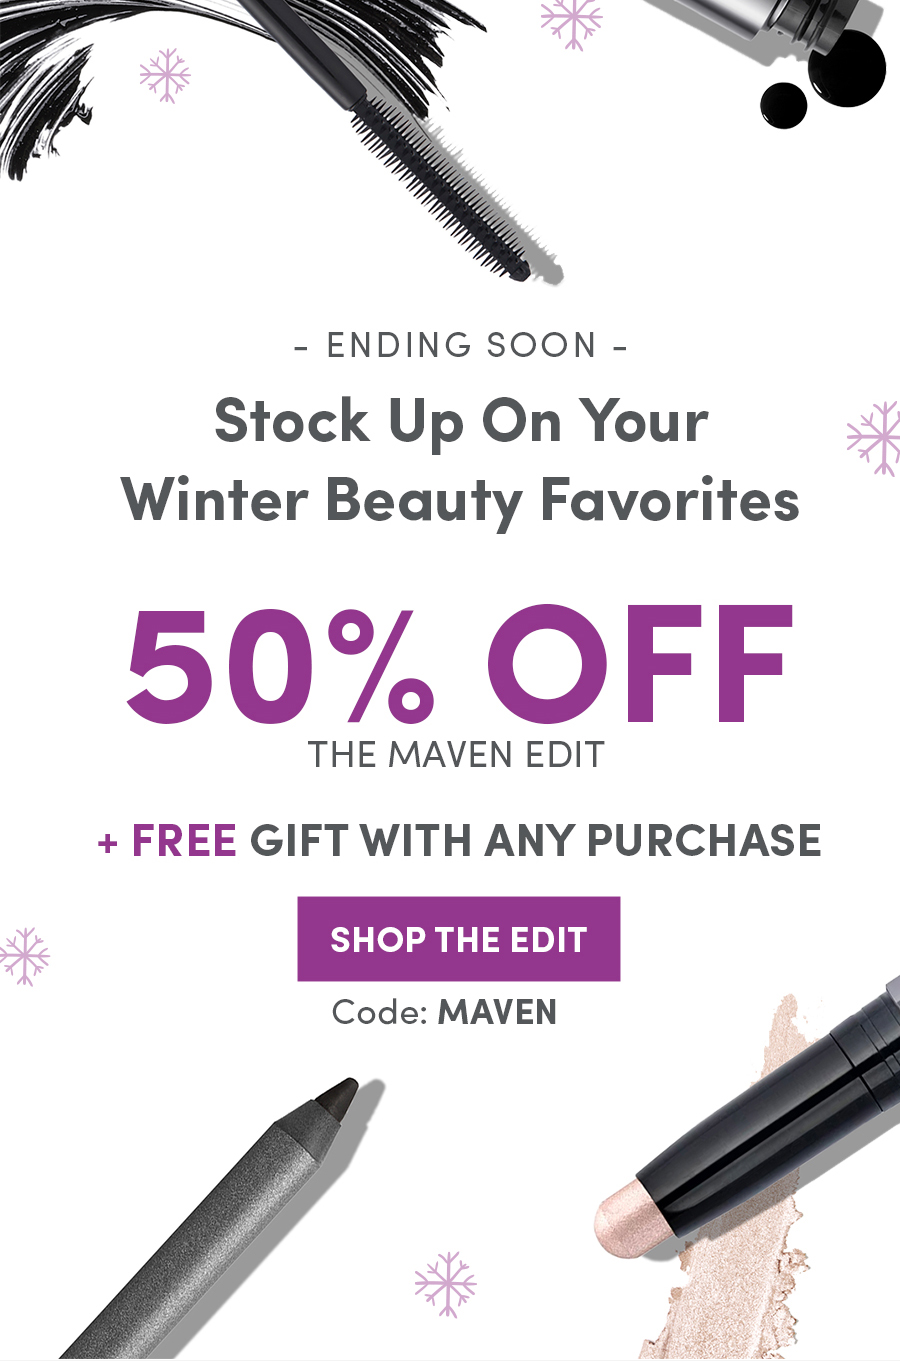 Stock Up On Your Winter Beauty Favorites - 50% Off The Maven Edit + Free Gift With Any Purchase - Shop The Edit